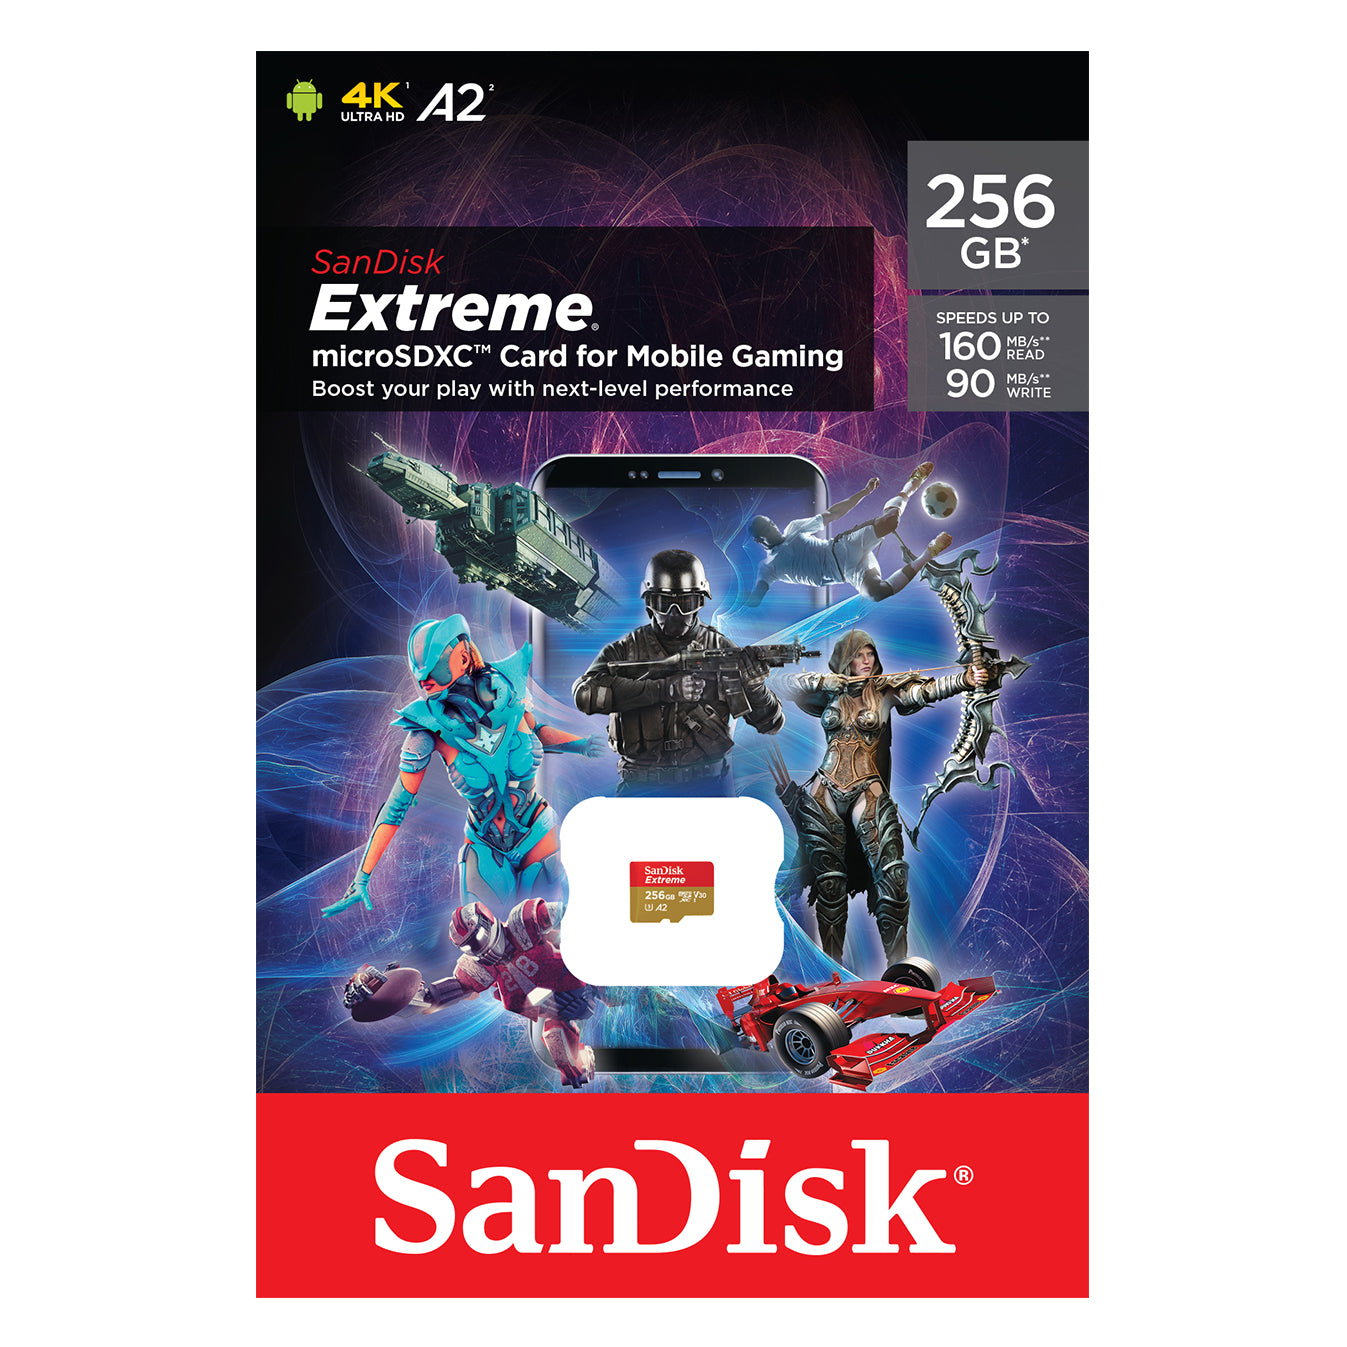 SanDisk Extreme® microSD™ Card for Mobile Gaming